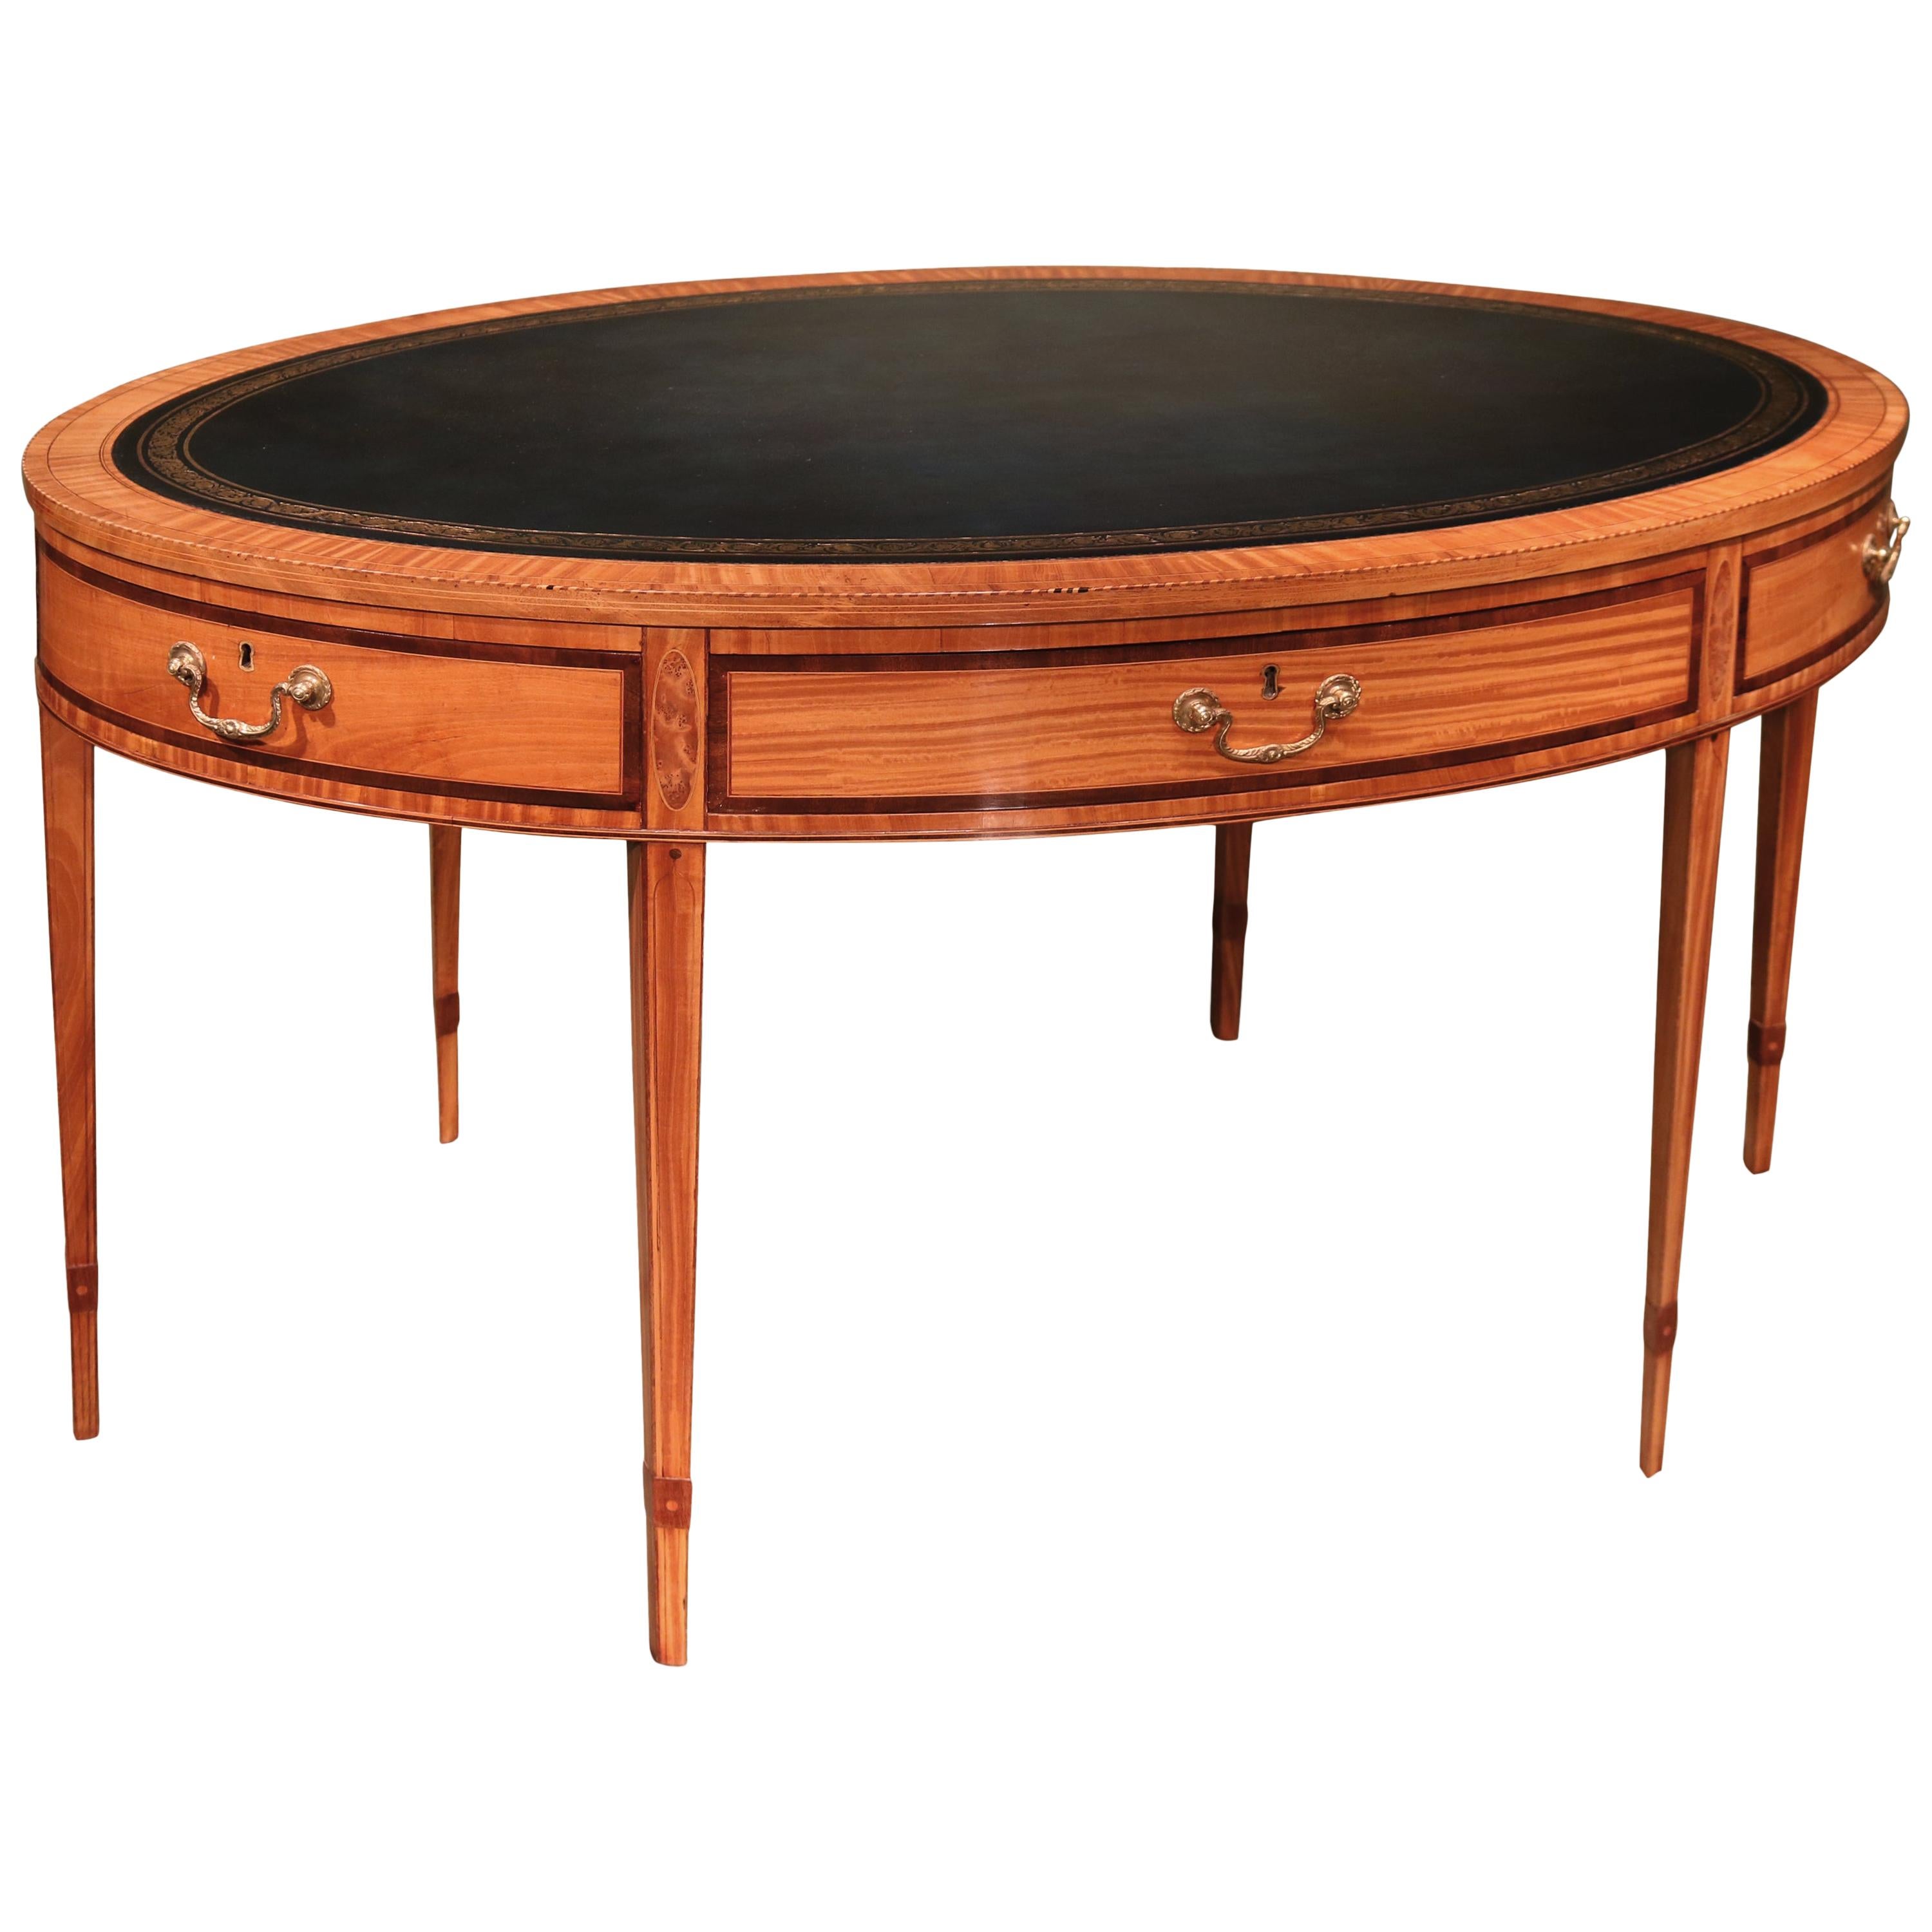 Mid-19th Century Satinwood Oval Writing Table in the Sheraton Manner